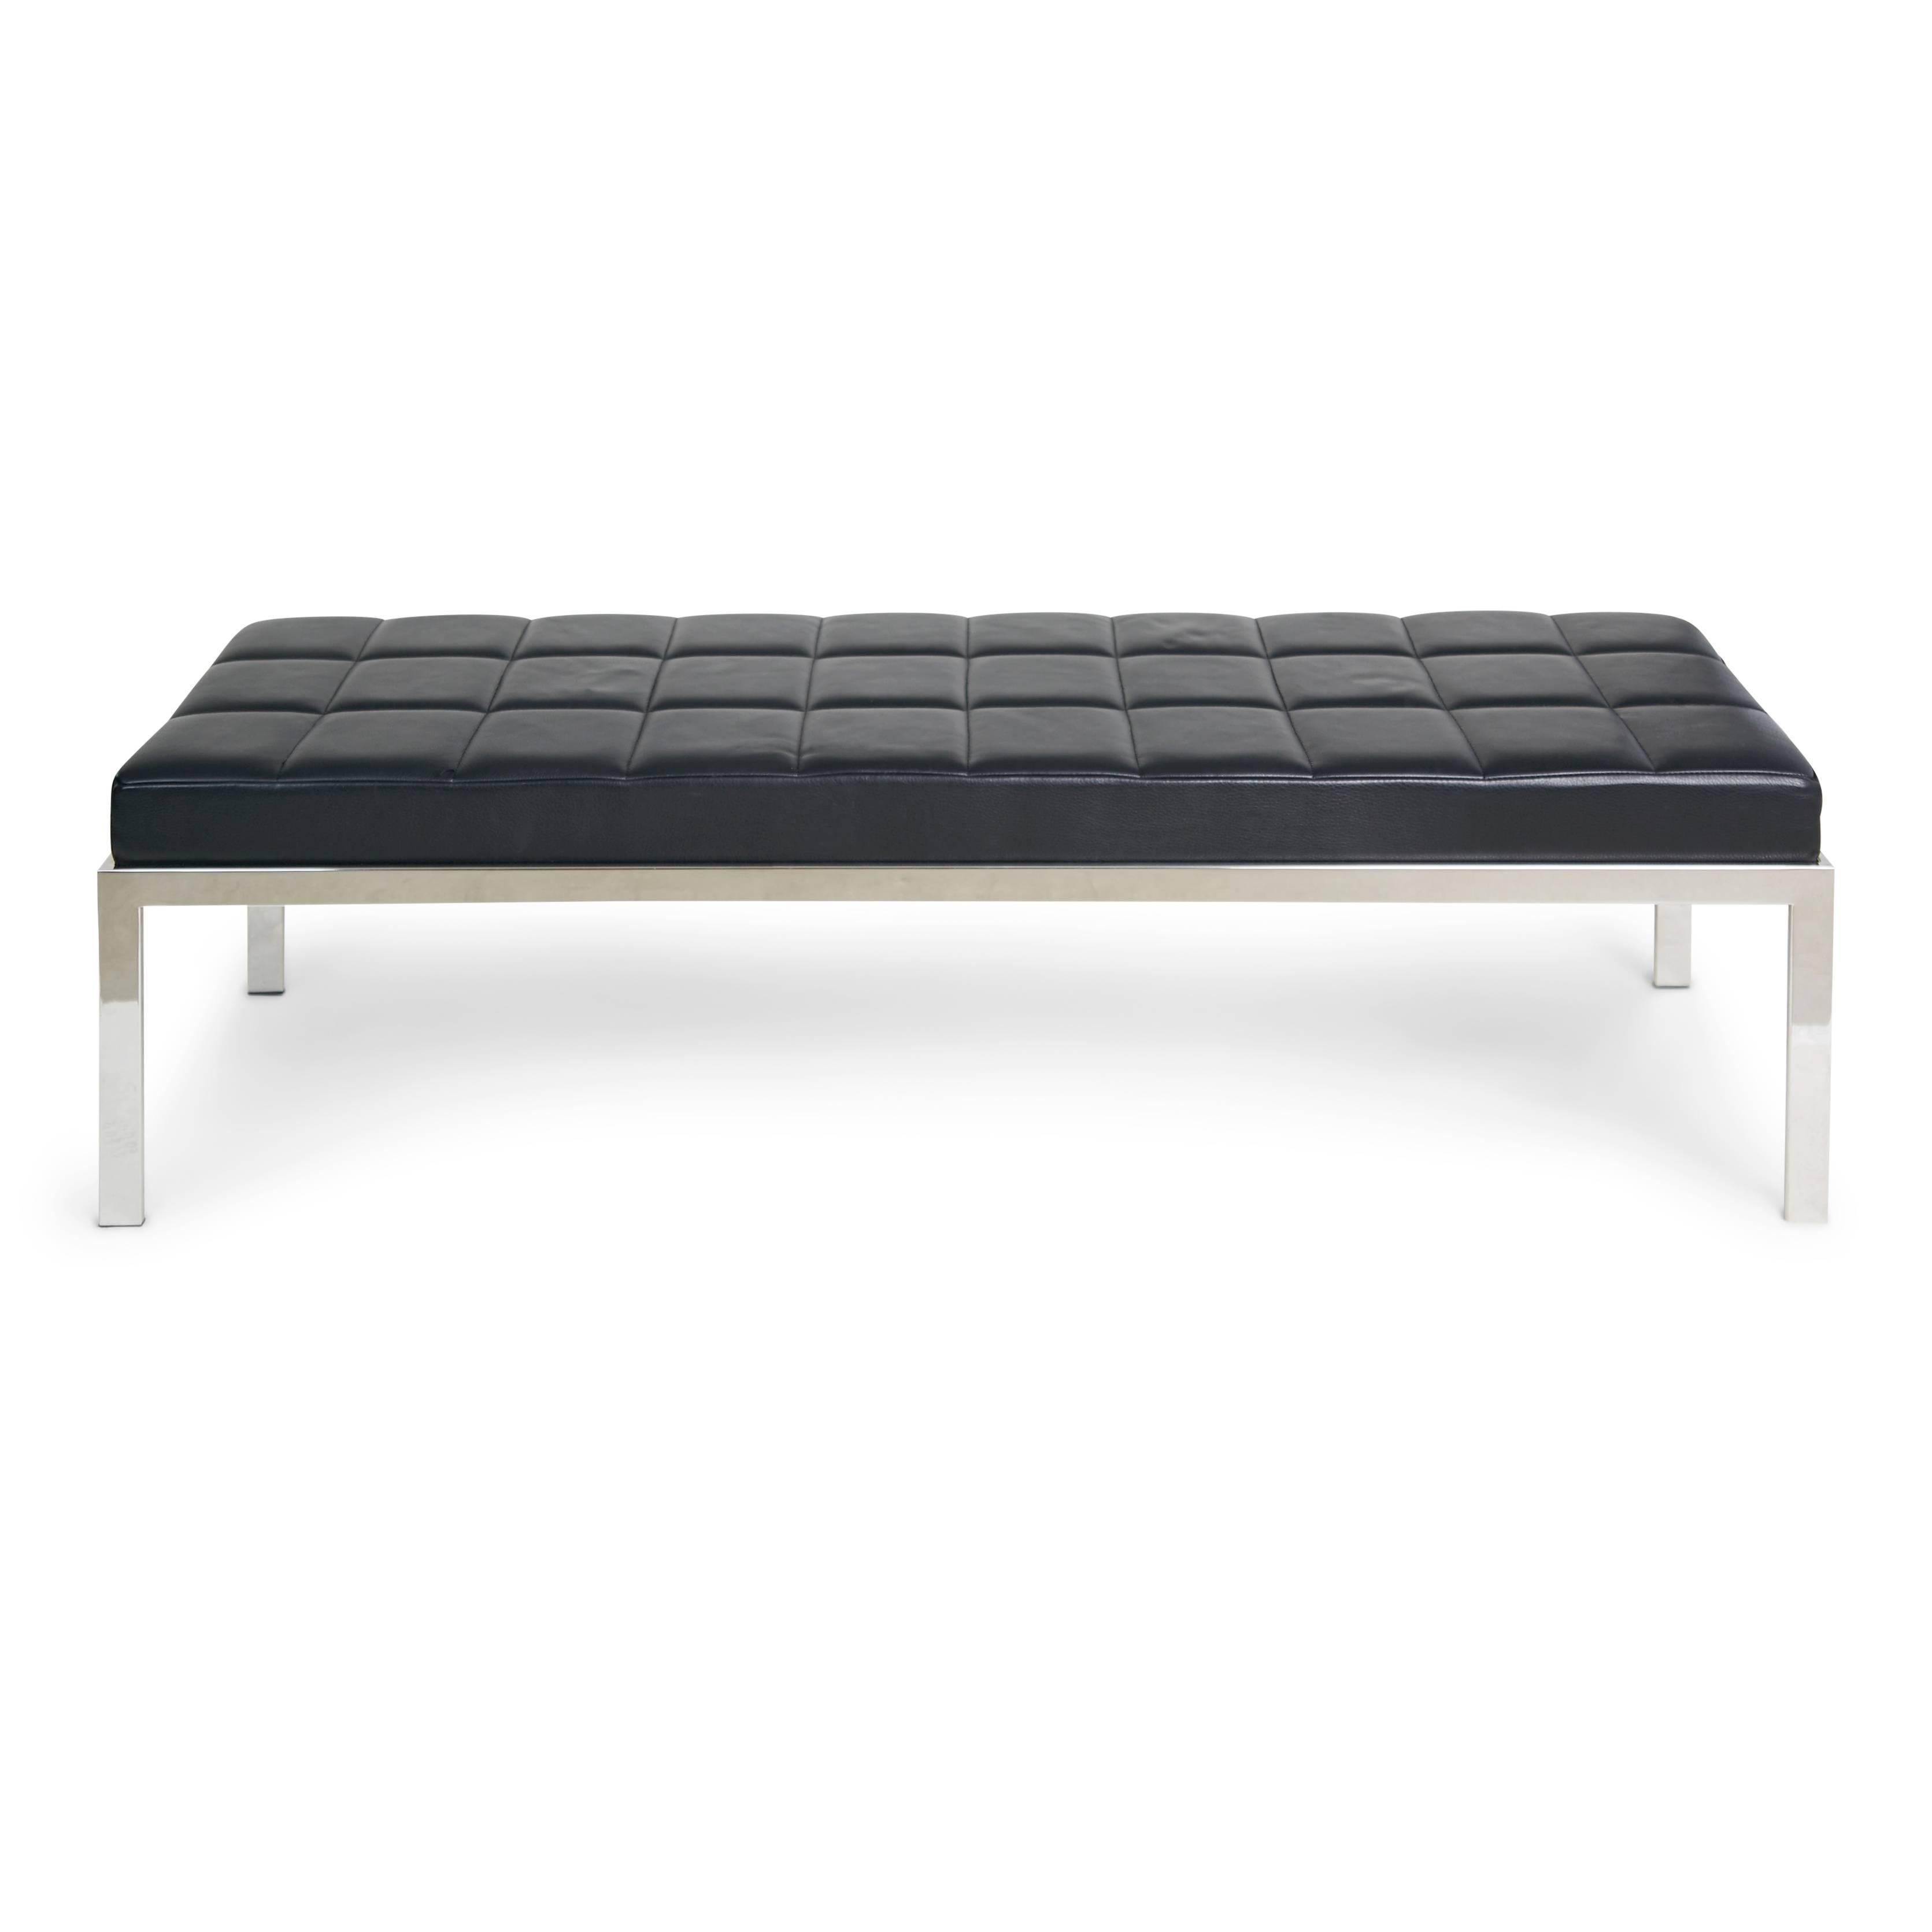 Sophisticated modern black leather and chromed steel bench from the Tribune Towers, Circa 1990. Well constructed seating with quality upholstered black leather.  In the style of Bertrand Goldberg.  

Excellent choice for a creative office or modern